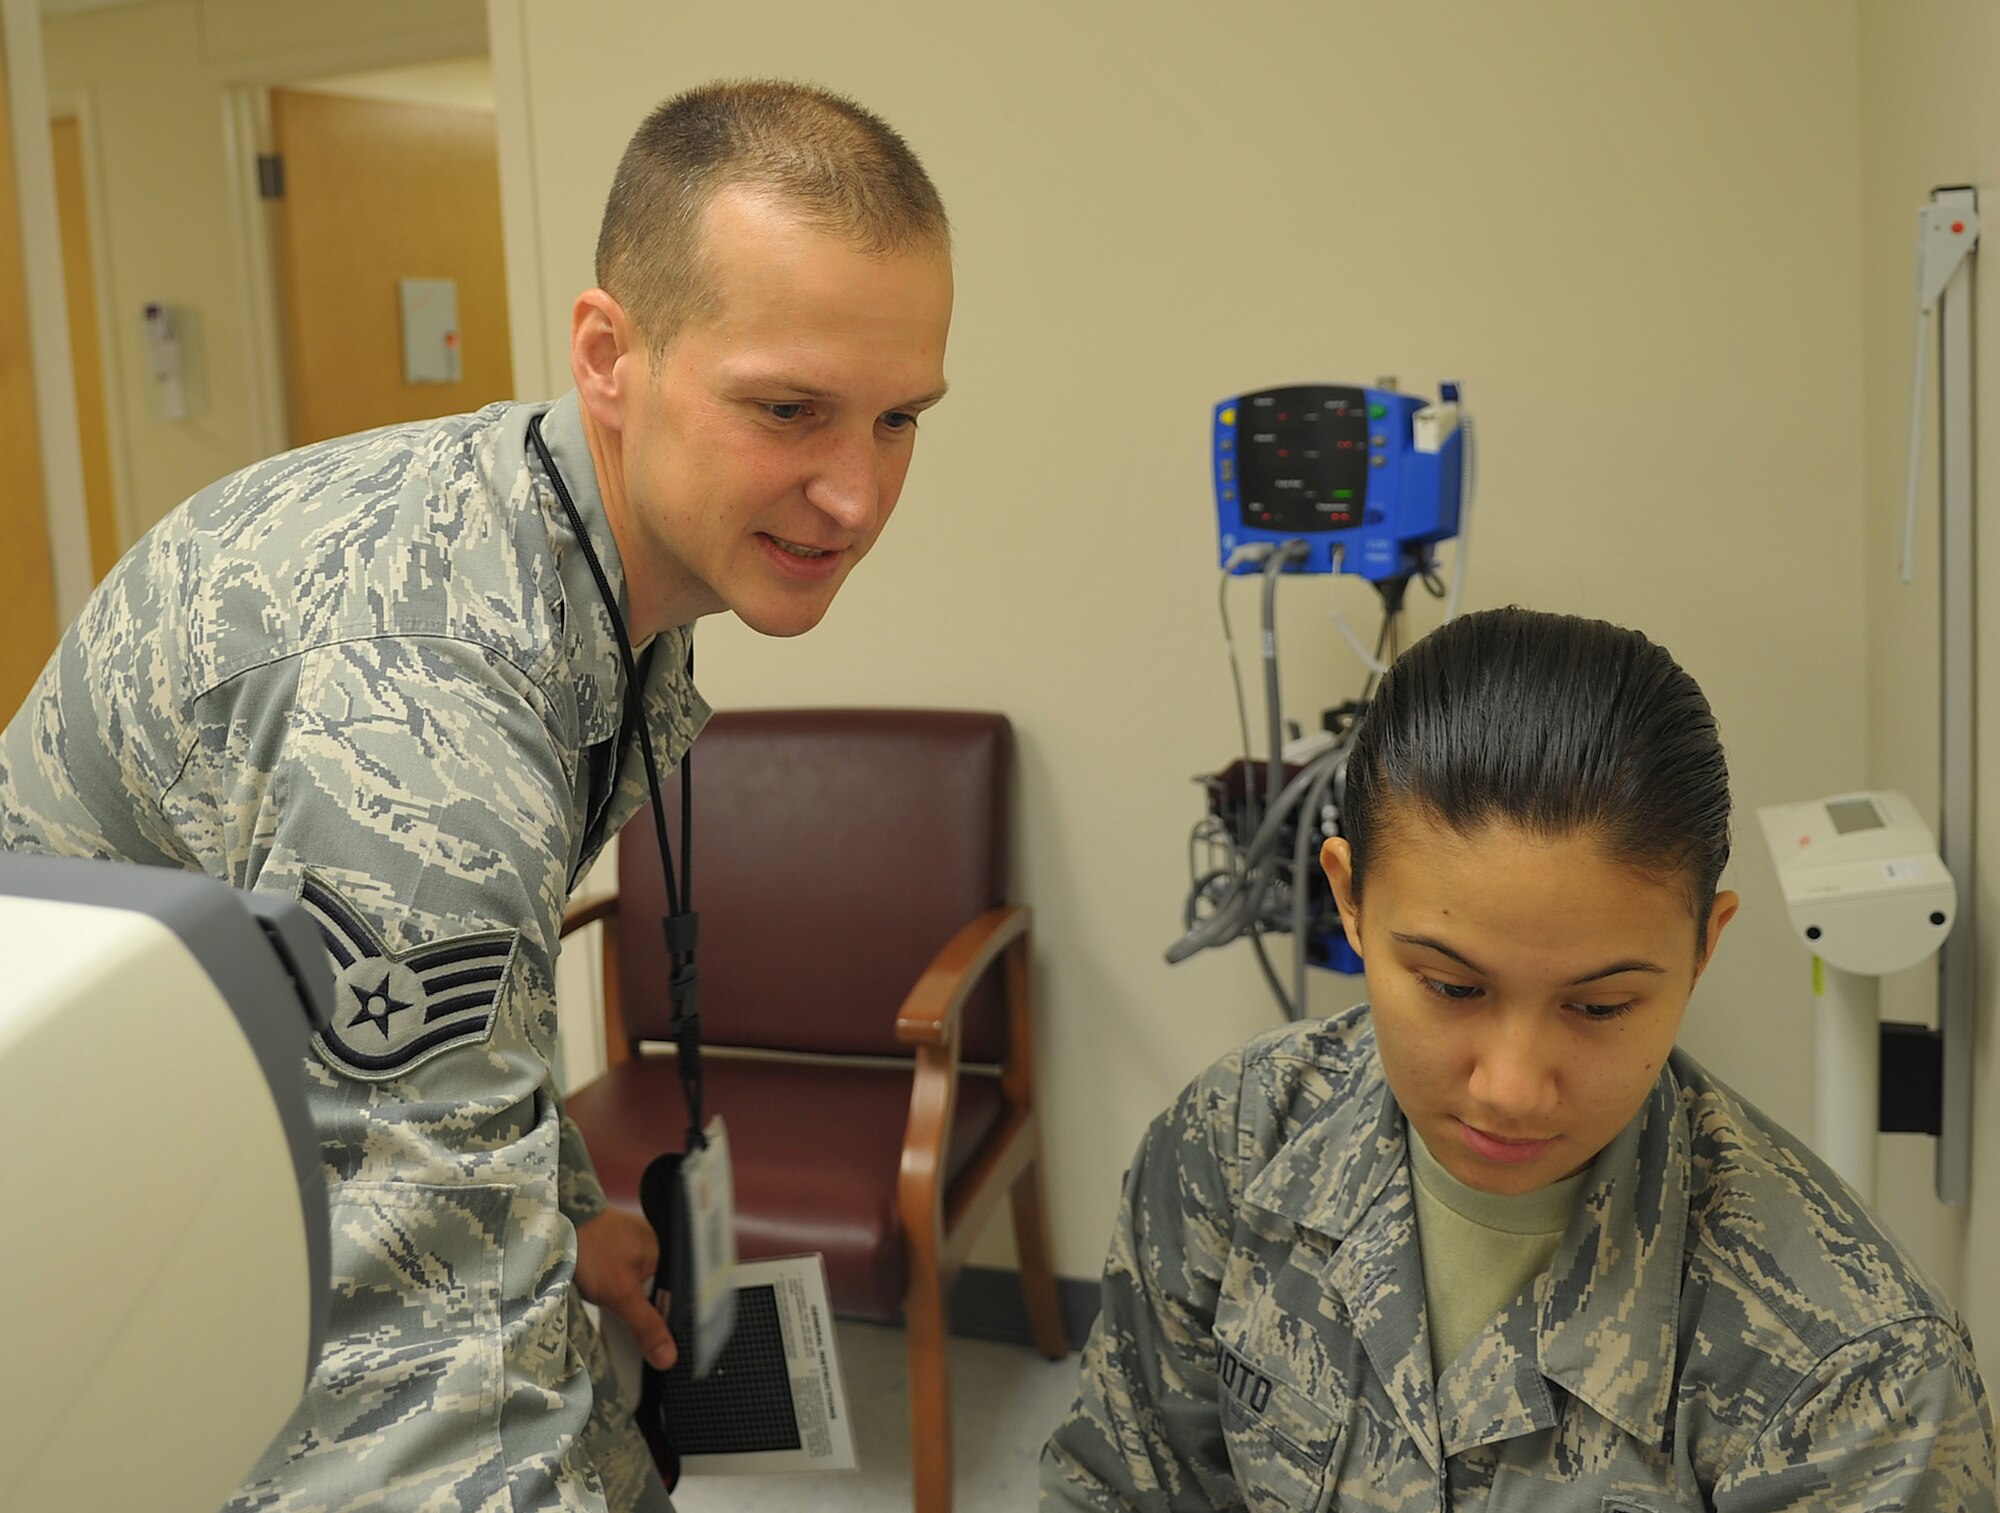 Staff Sgt. Aliaksei Krasouski, a 78th Aerospace Medical Services technician, consults with Airman 1st Class Cheree Voto, 78th Medical Support Squadron technician, after conducting an eye exam.  (U.S. Air Force photo by Misuzu Allen)